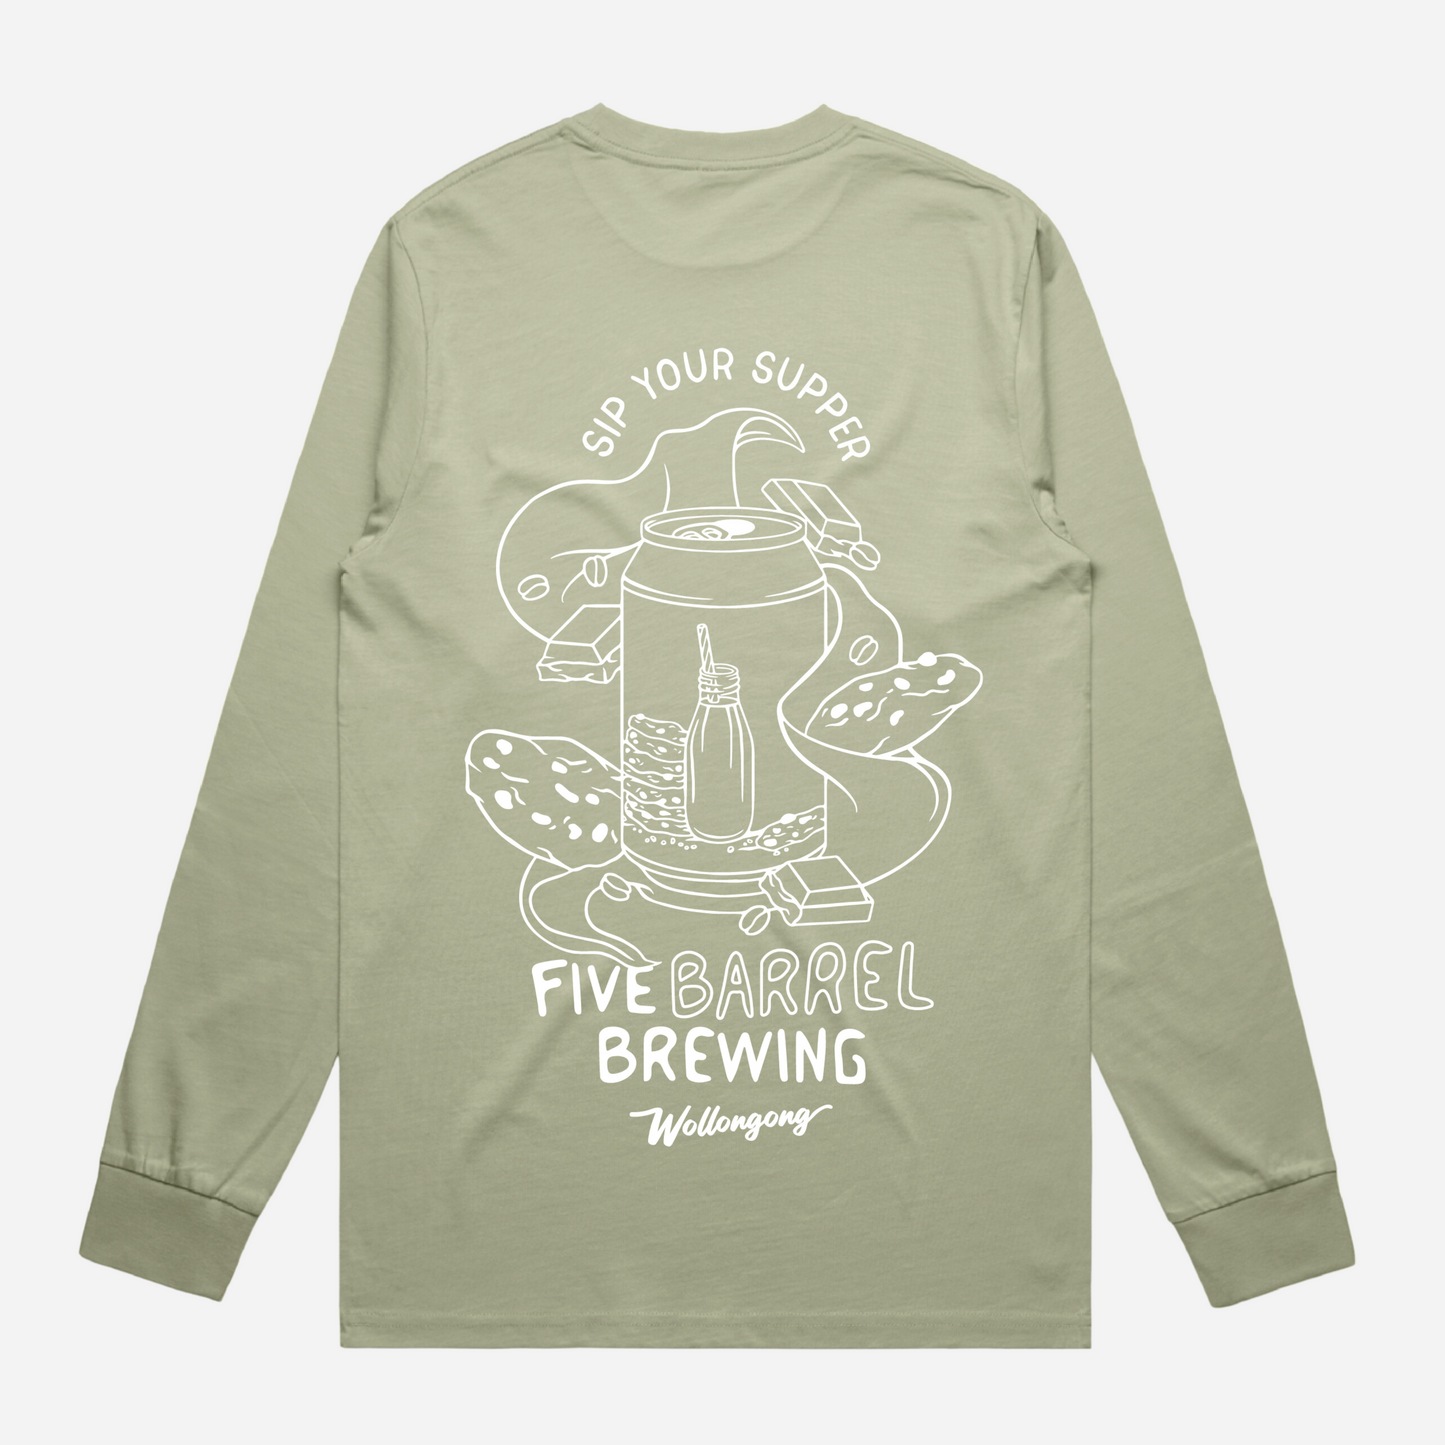 Pistachio coloured long sleeve t-shirt that says "sip your supper" with Night Cap Milk Stout Image and Five Barrel Brewing Logo